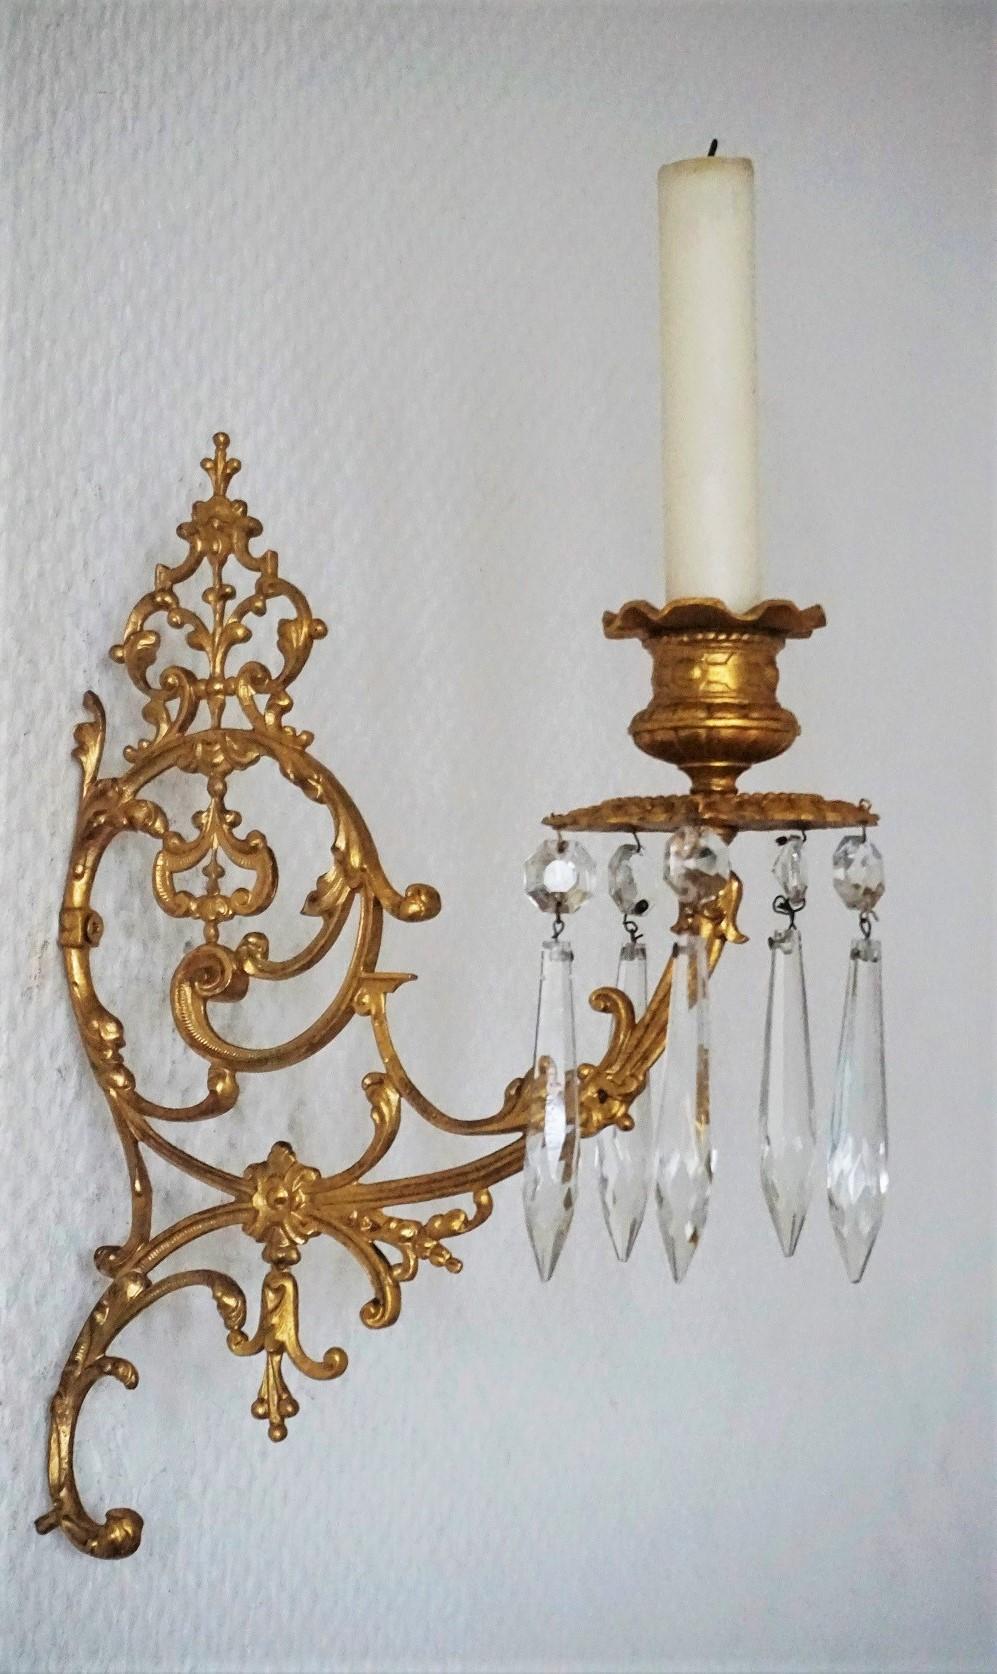 Set of Four Fine French Louis XVI Period Gold Doré Bronze Candle Wall Sconces For Sale 2